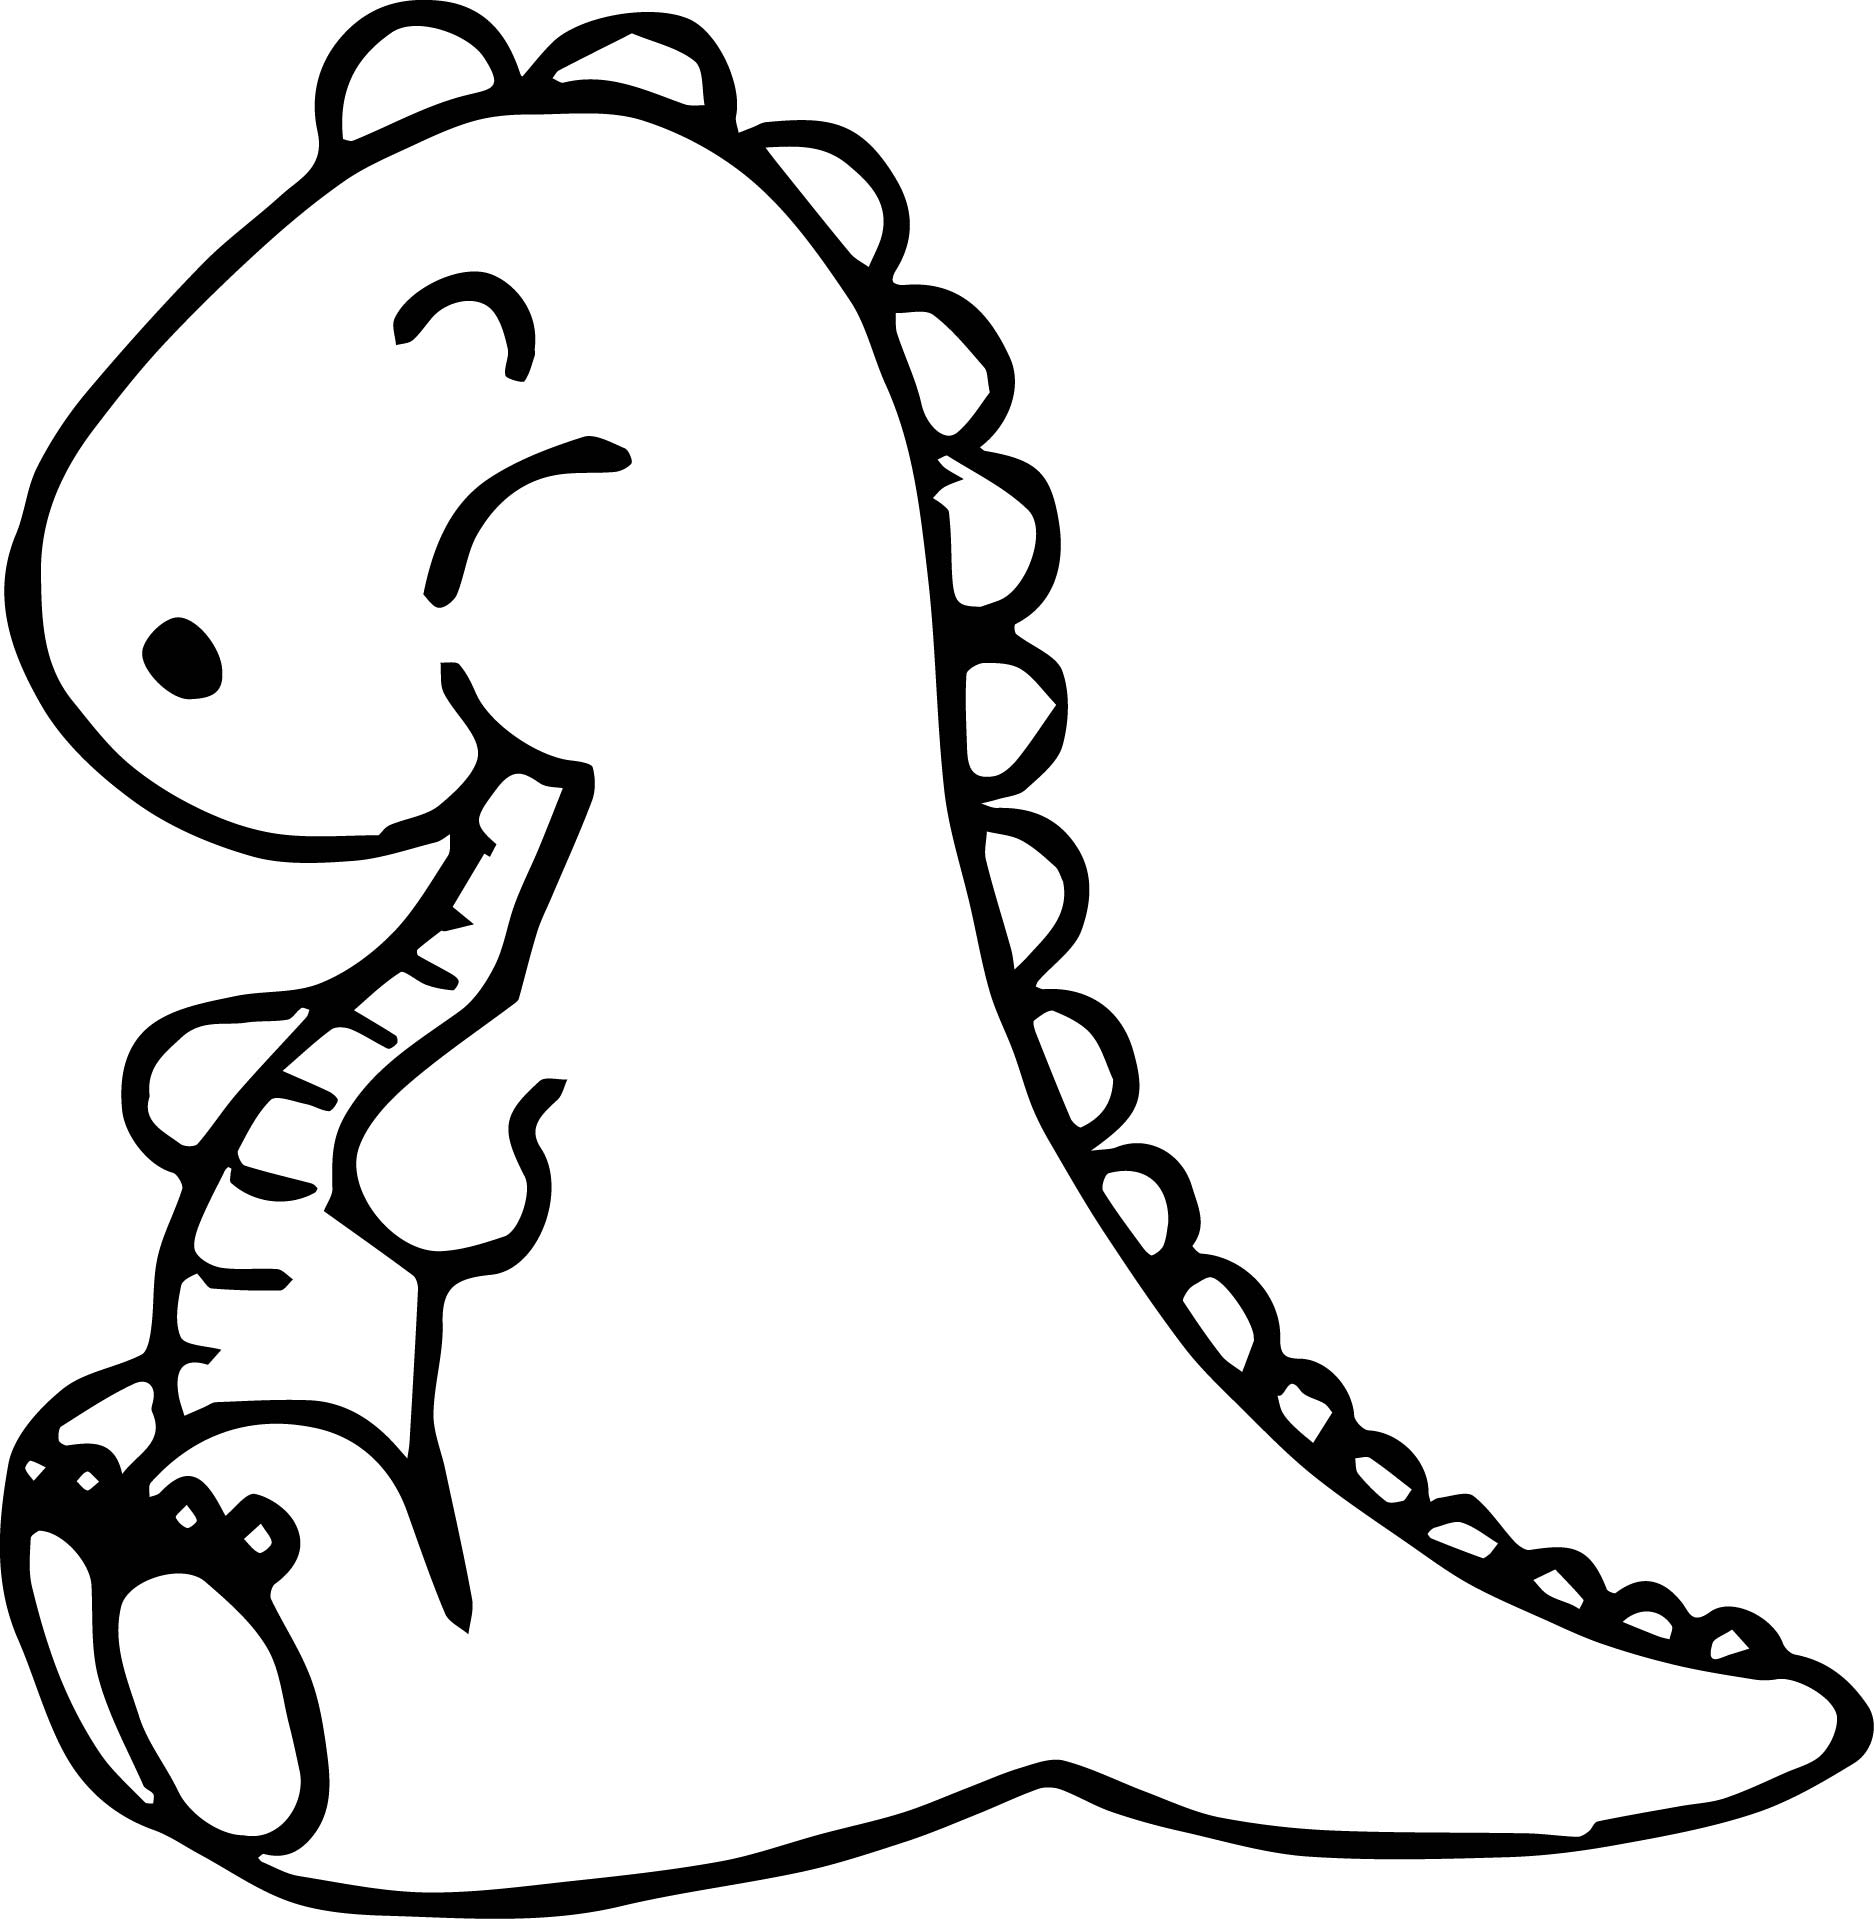 Baby Dinosaur Coloring Page | Free download on ClipArtMag